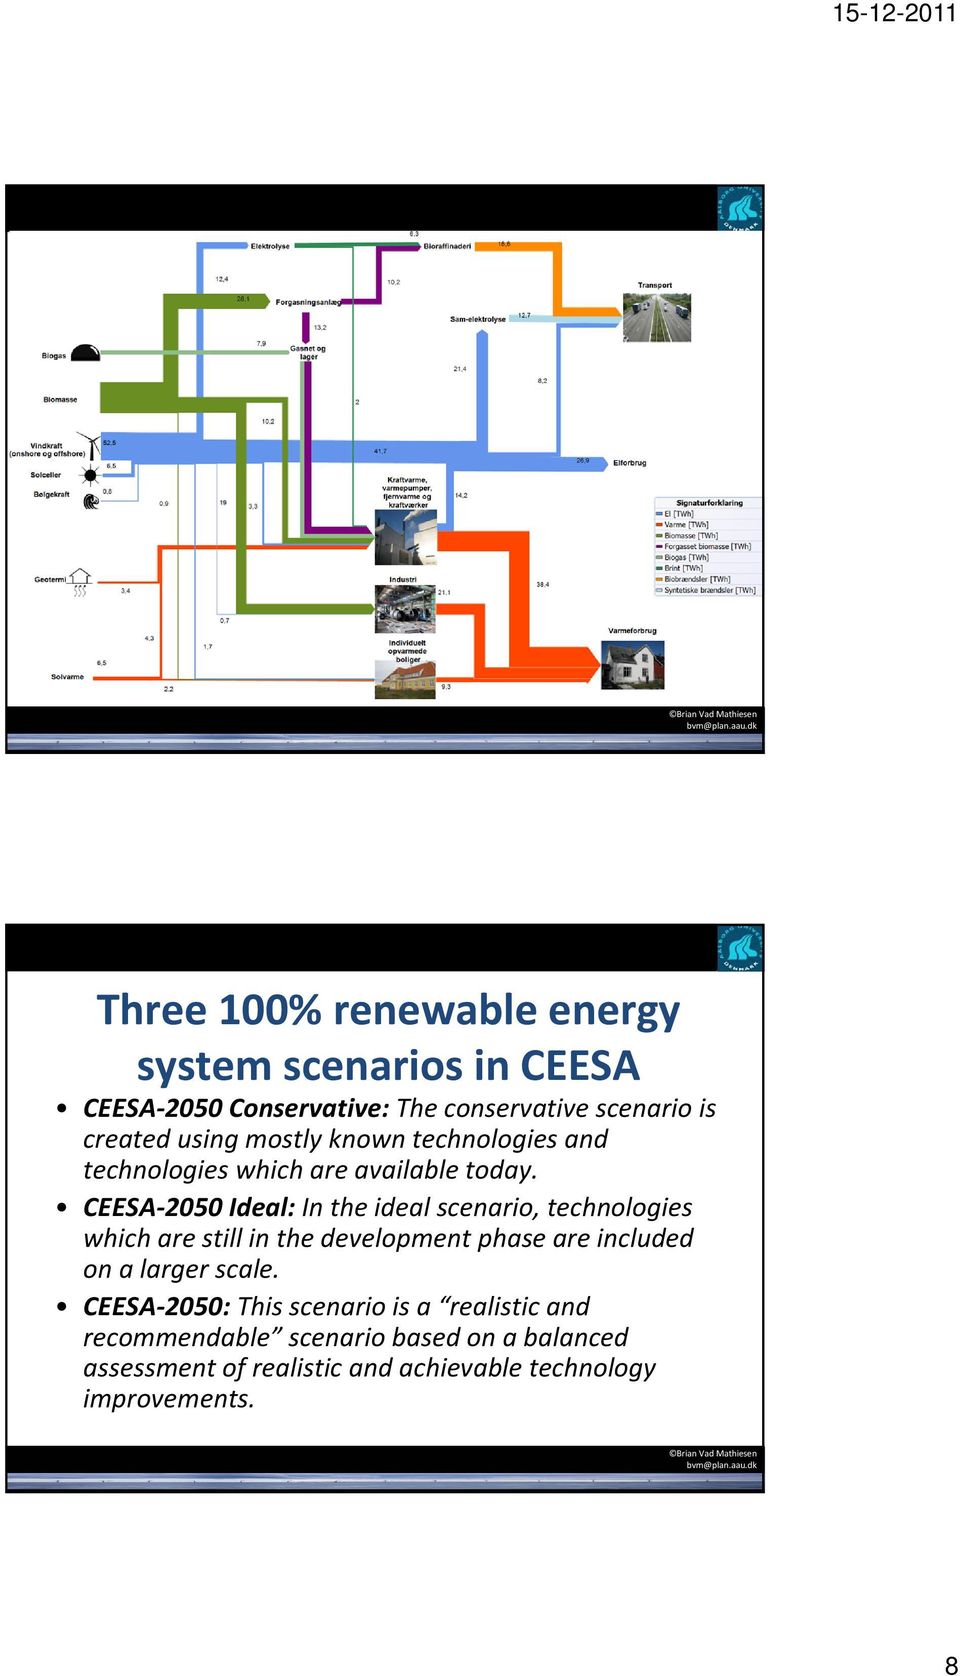 CEESA 25 Ideal: In the ideal scenario, technologies which are still in the development phase are included on a larger